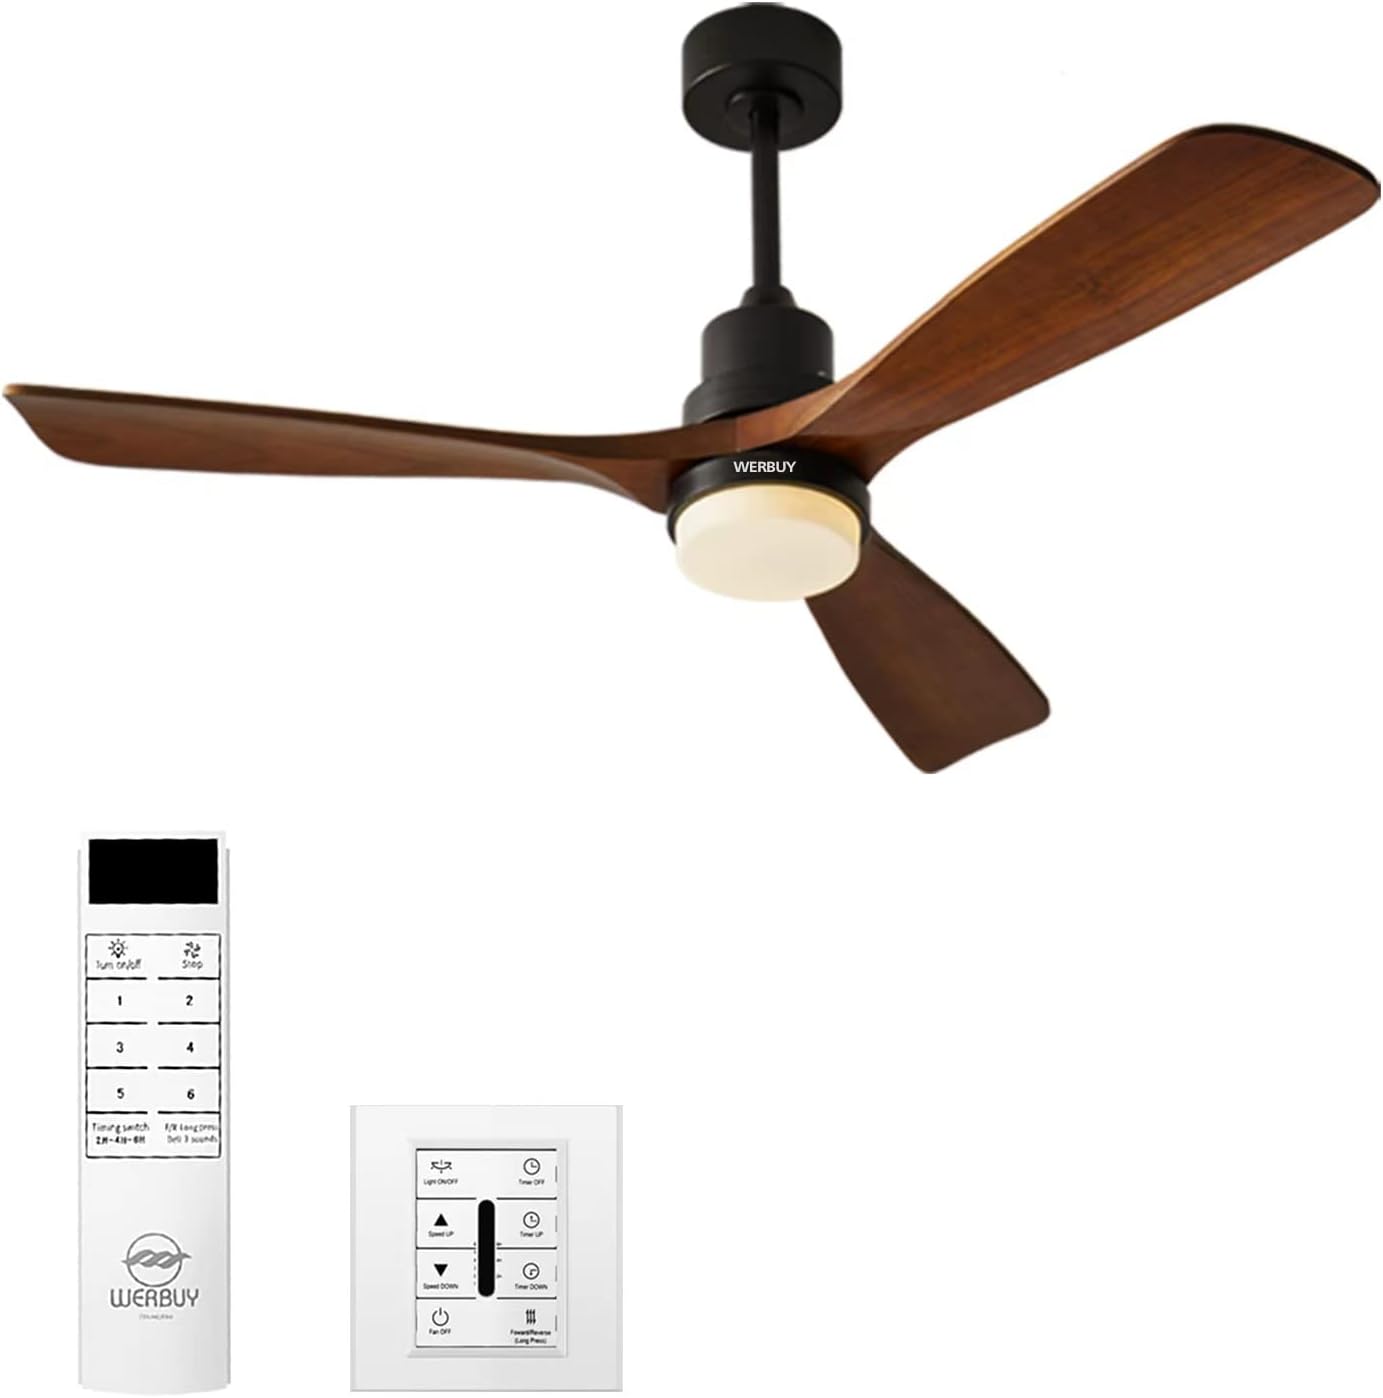 WERBUY 52" Ceiling Fans with Lights Wireless Wall Control and Remote, Wood Ceiling Fan with Quiet Reversible DC Motor/Sleep Timer